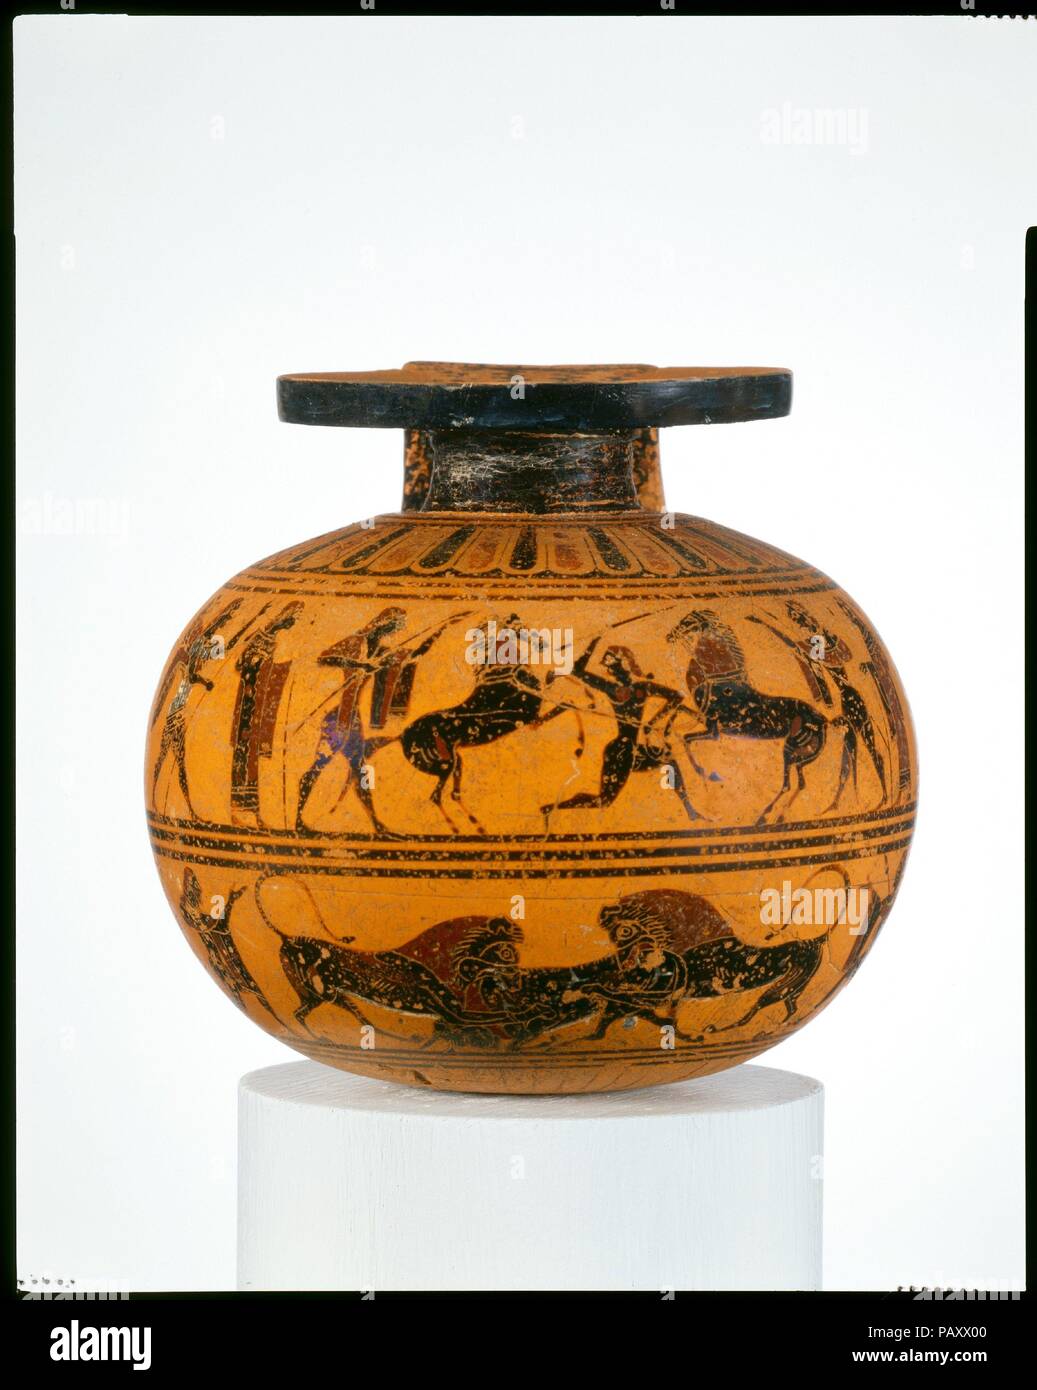 Terracotta aryballos (oil flask). Culture: Greek, Attic. Dimensions: H. 3 1/4 in. (8.3 cm)  diameter  3 1/2 in. (8.9 cm). Date: ca. 550 B.C..  On the handle, Dionysos and two revelers  Upper frieze, horse tamer between onlookers and two wrestlers  Lower frieze, animal combats between onlookers  The aryballos is connected with the gymnasium and the palaistra (exercise ground).  After exercising, men used oil to clean and care for their skin. The subjects here refer to major interests of young Athenians--horses, athletics, and symposia (drinking party). Museum: Metropolitan Museum of Art, New Yo Stock Photo